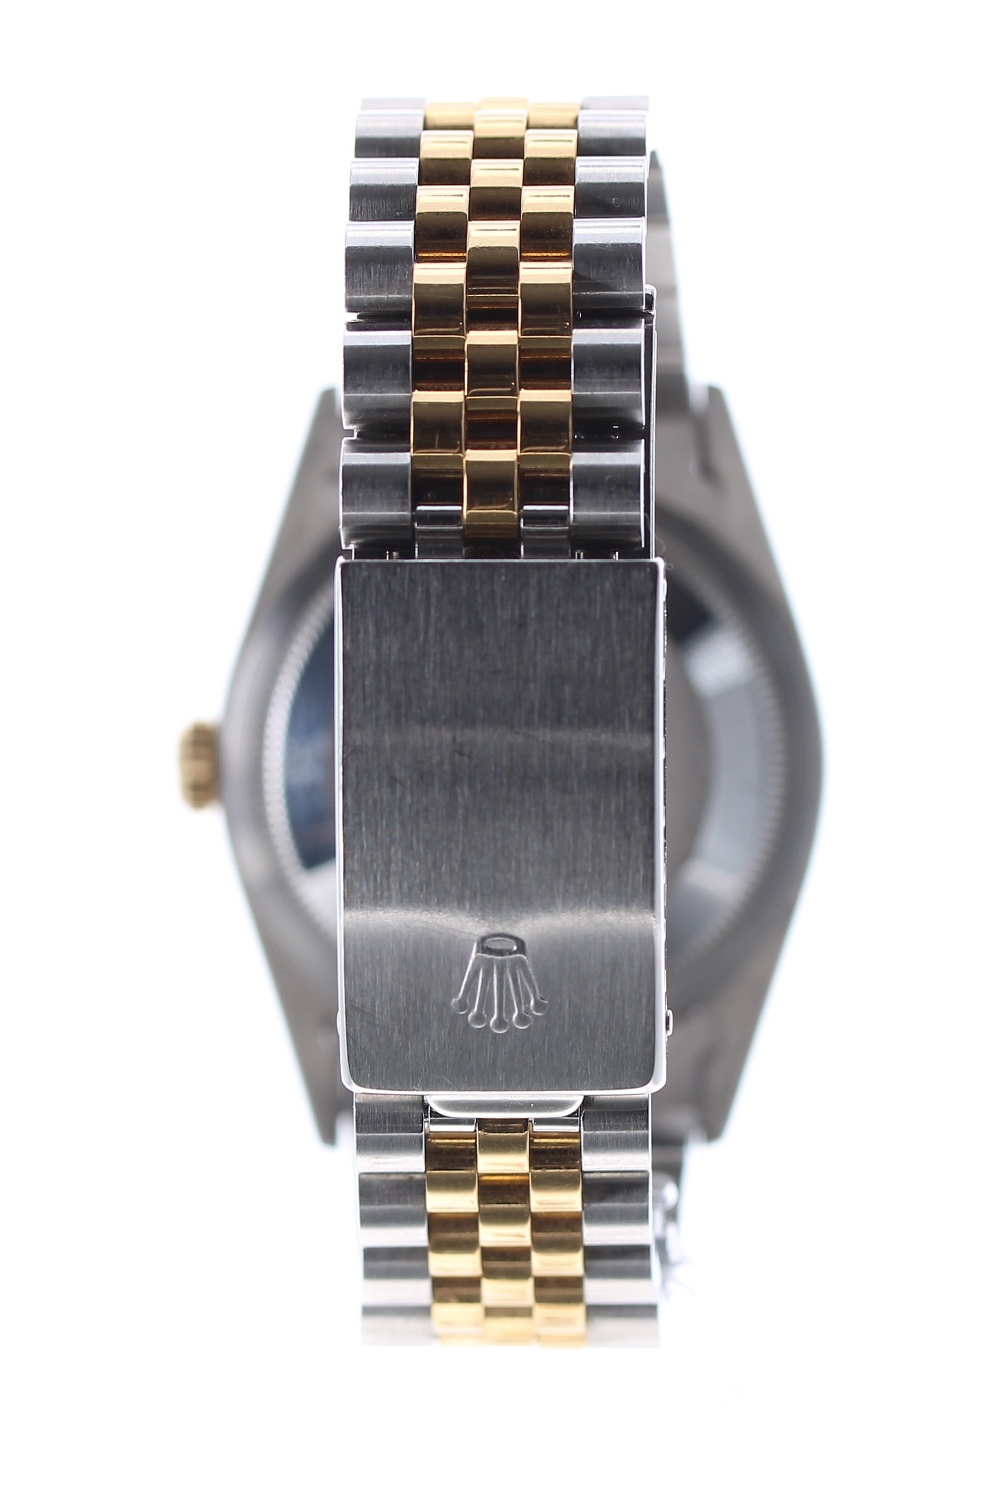 Rolex Oyster Perpetual Datejust gold and stainless steel gentleman's bracelet watch, ref. 16233, - Image 7 of 8